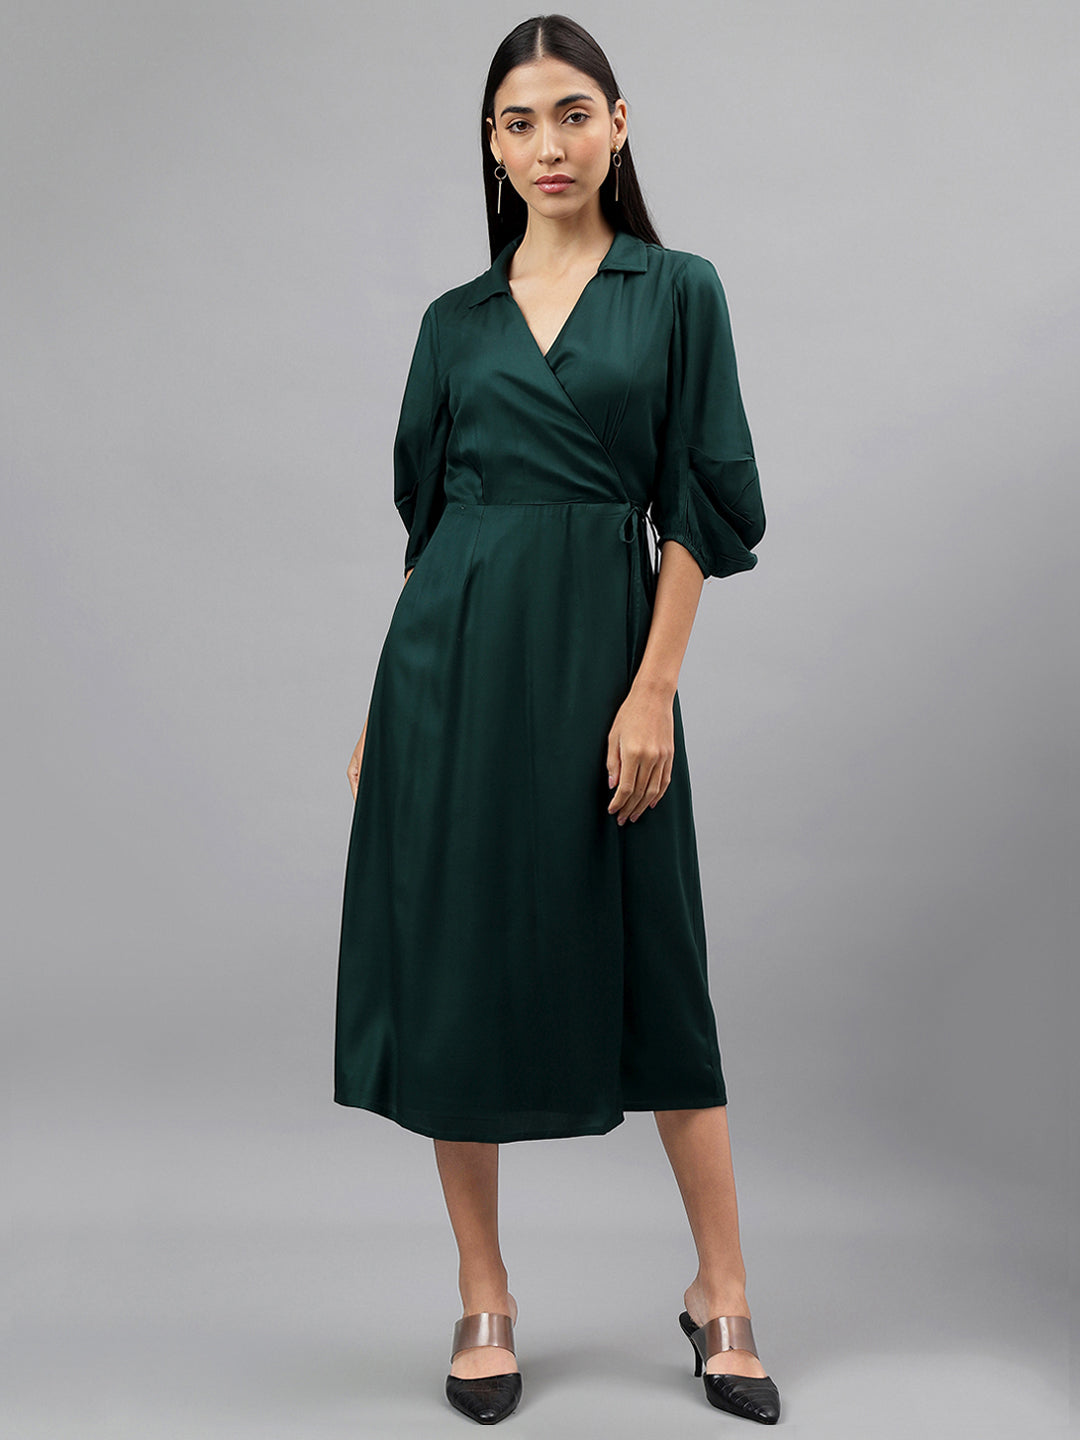 Greenbotle 3/4 Sleeve Collar Neck Solid Dress